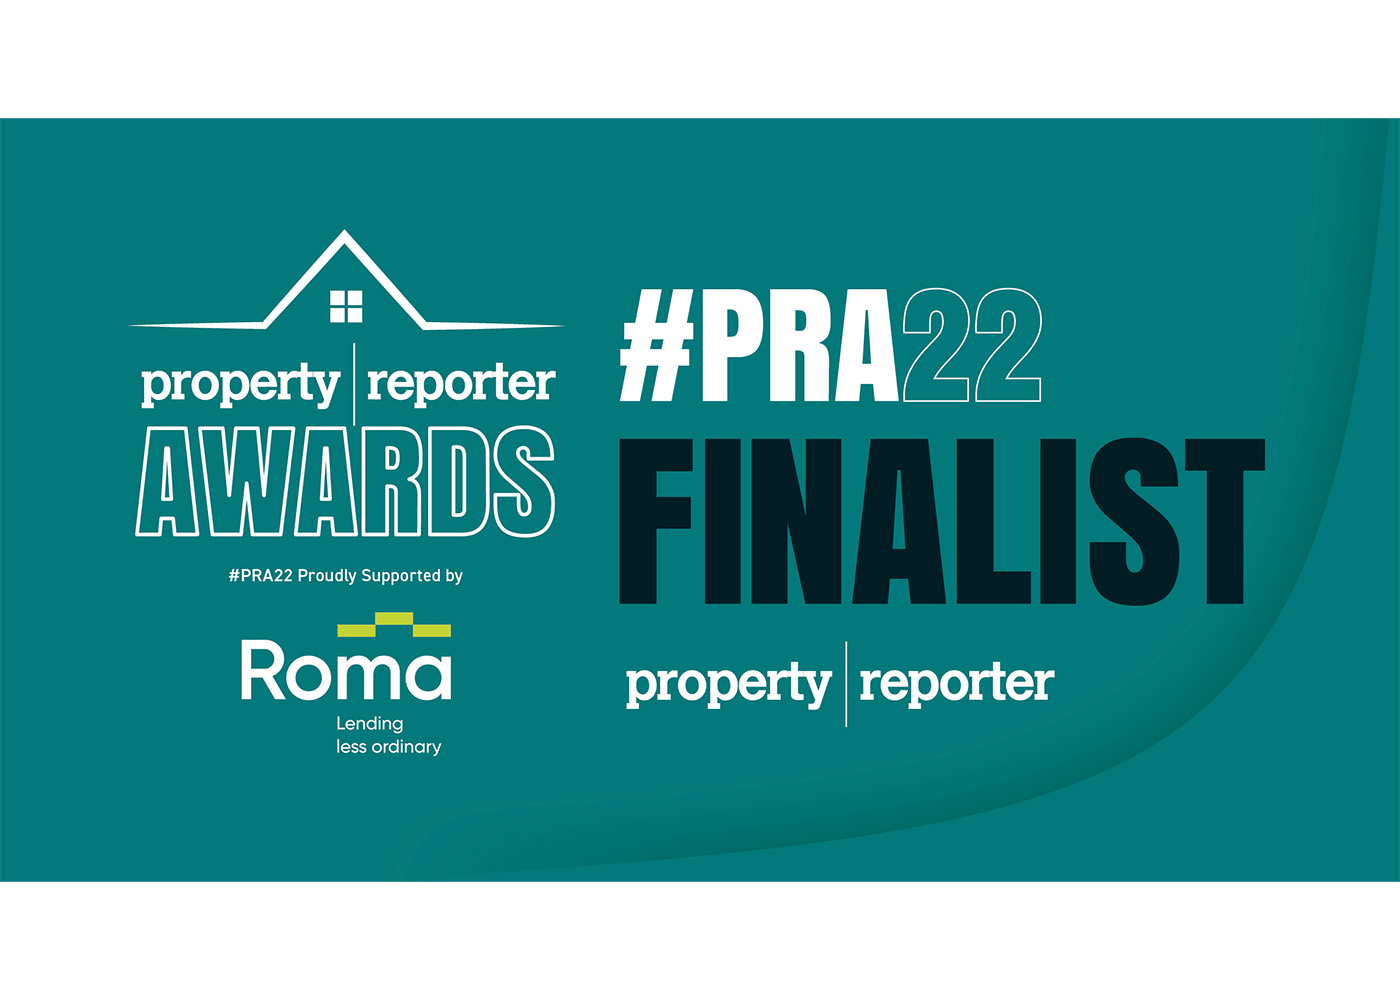 Our Awards - Property Reporter Awards